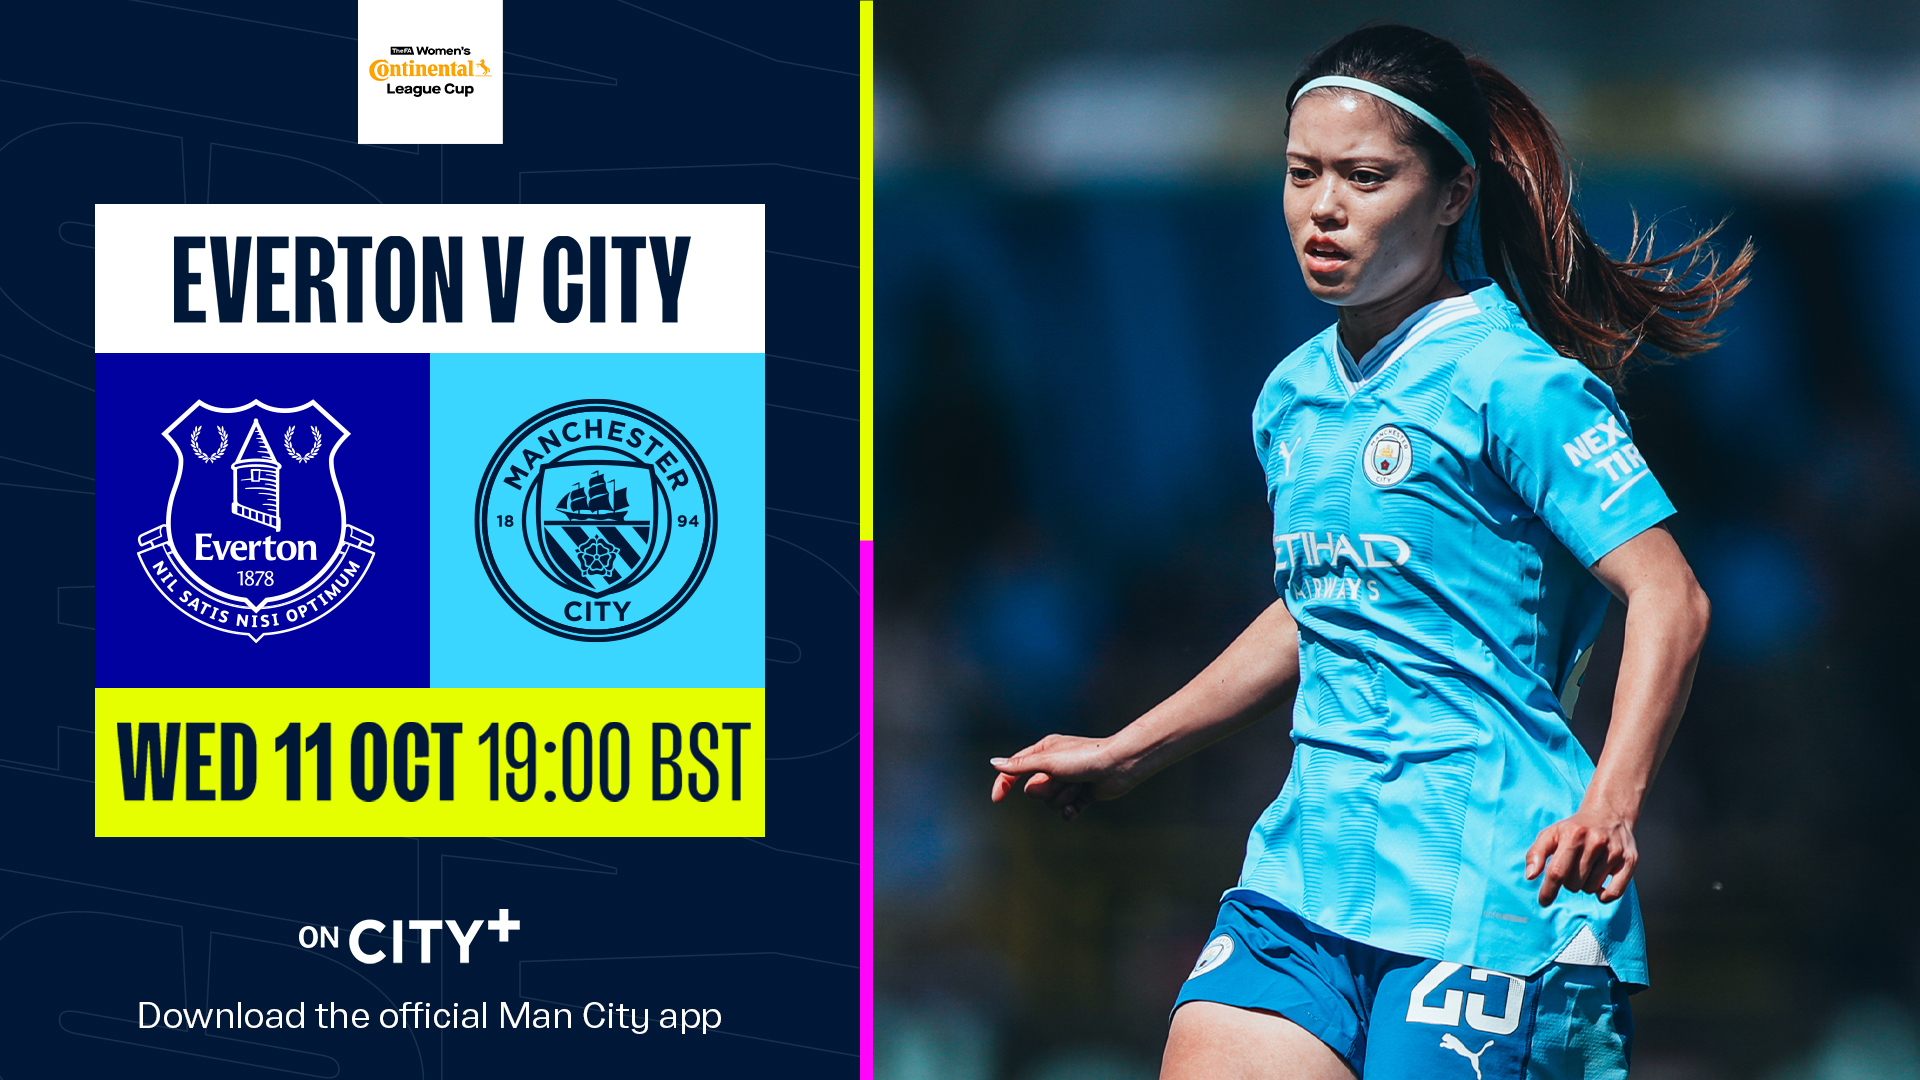 Everton v City FA Womens League Cup game live on CITY+